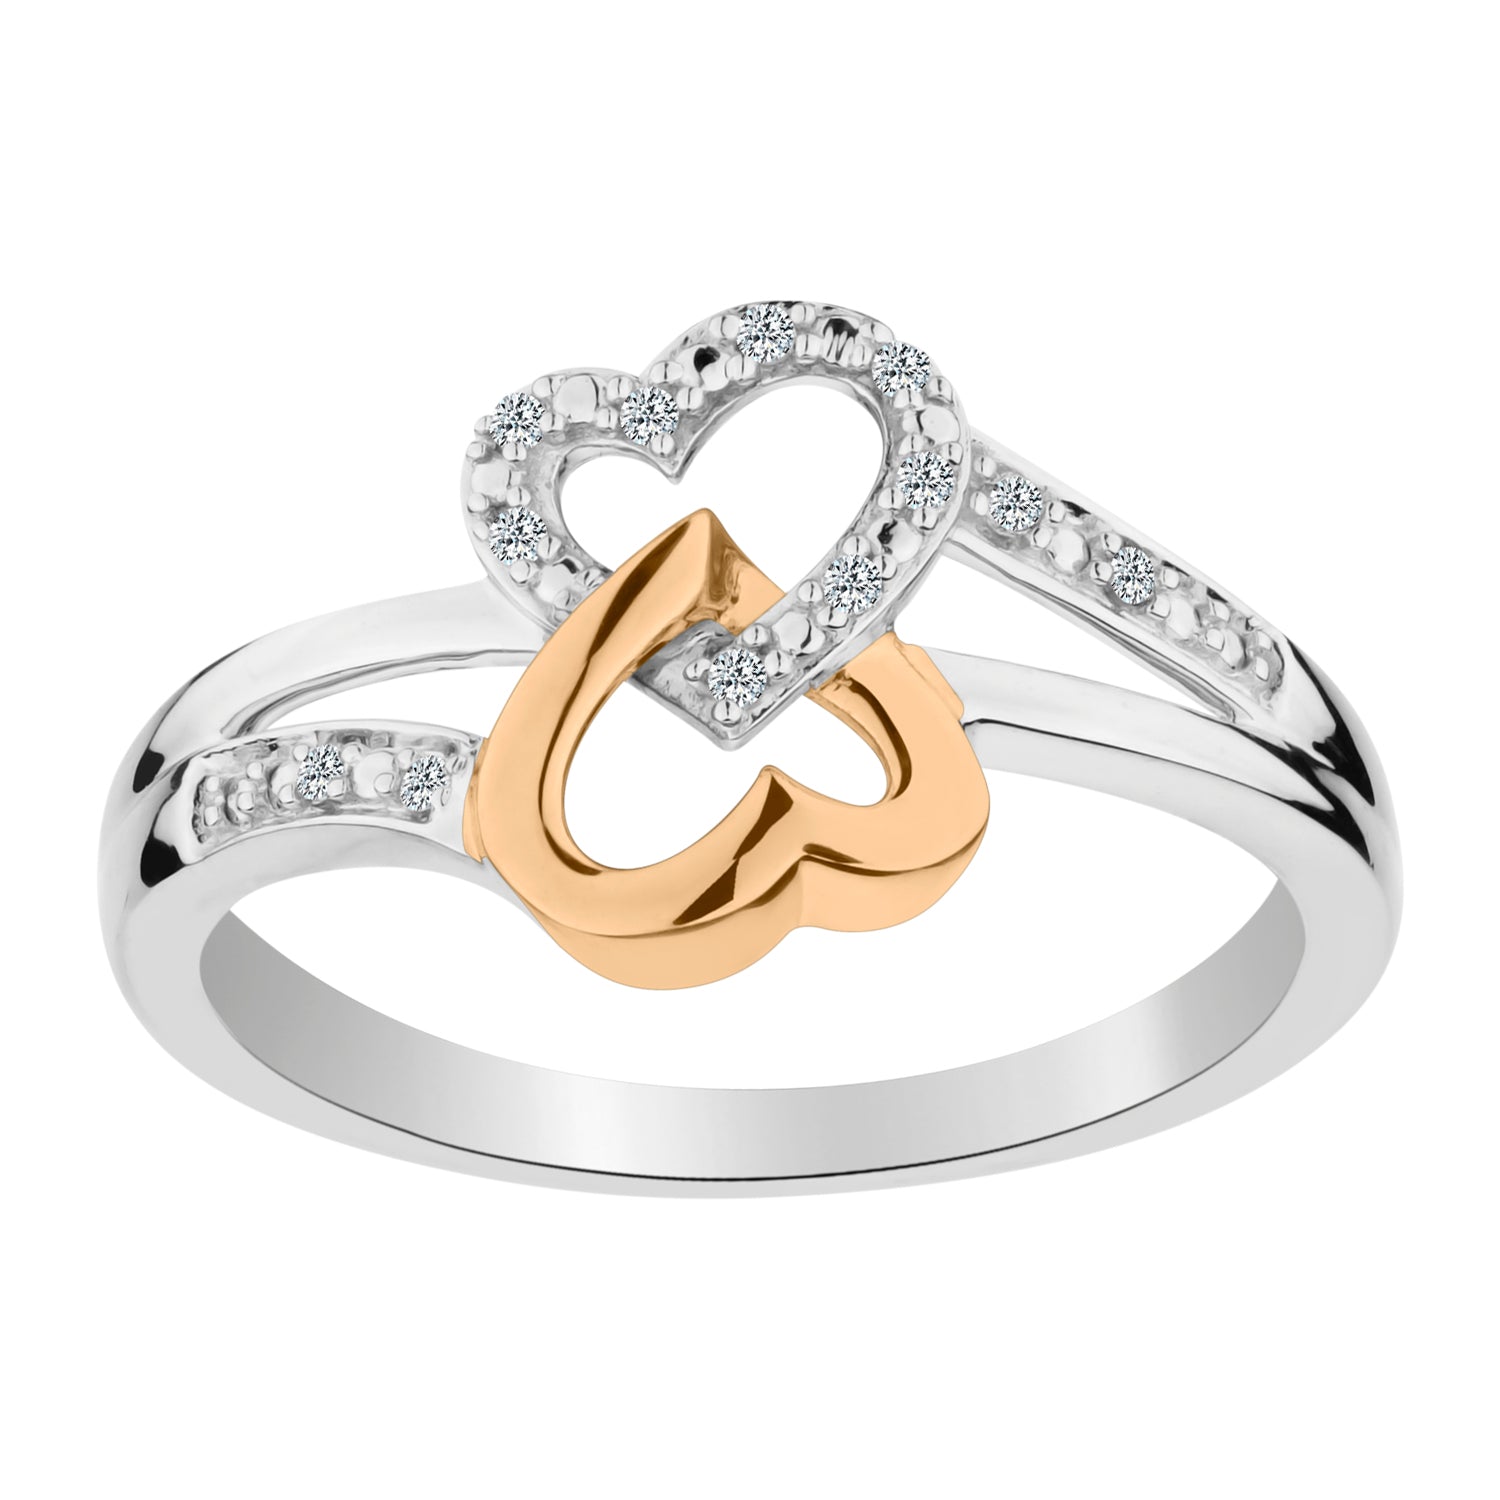 .05 CARAT DIAMOND DOUBLE HEART RING, 10kt WHITE AND YELLOW GOLD (TWO TONE). Fashion Rings - Griffin Jewellery Designs